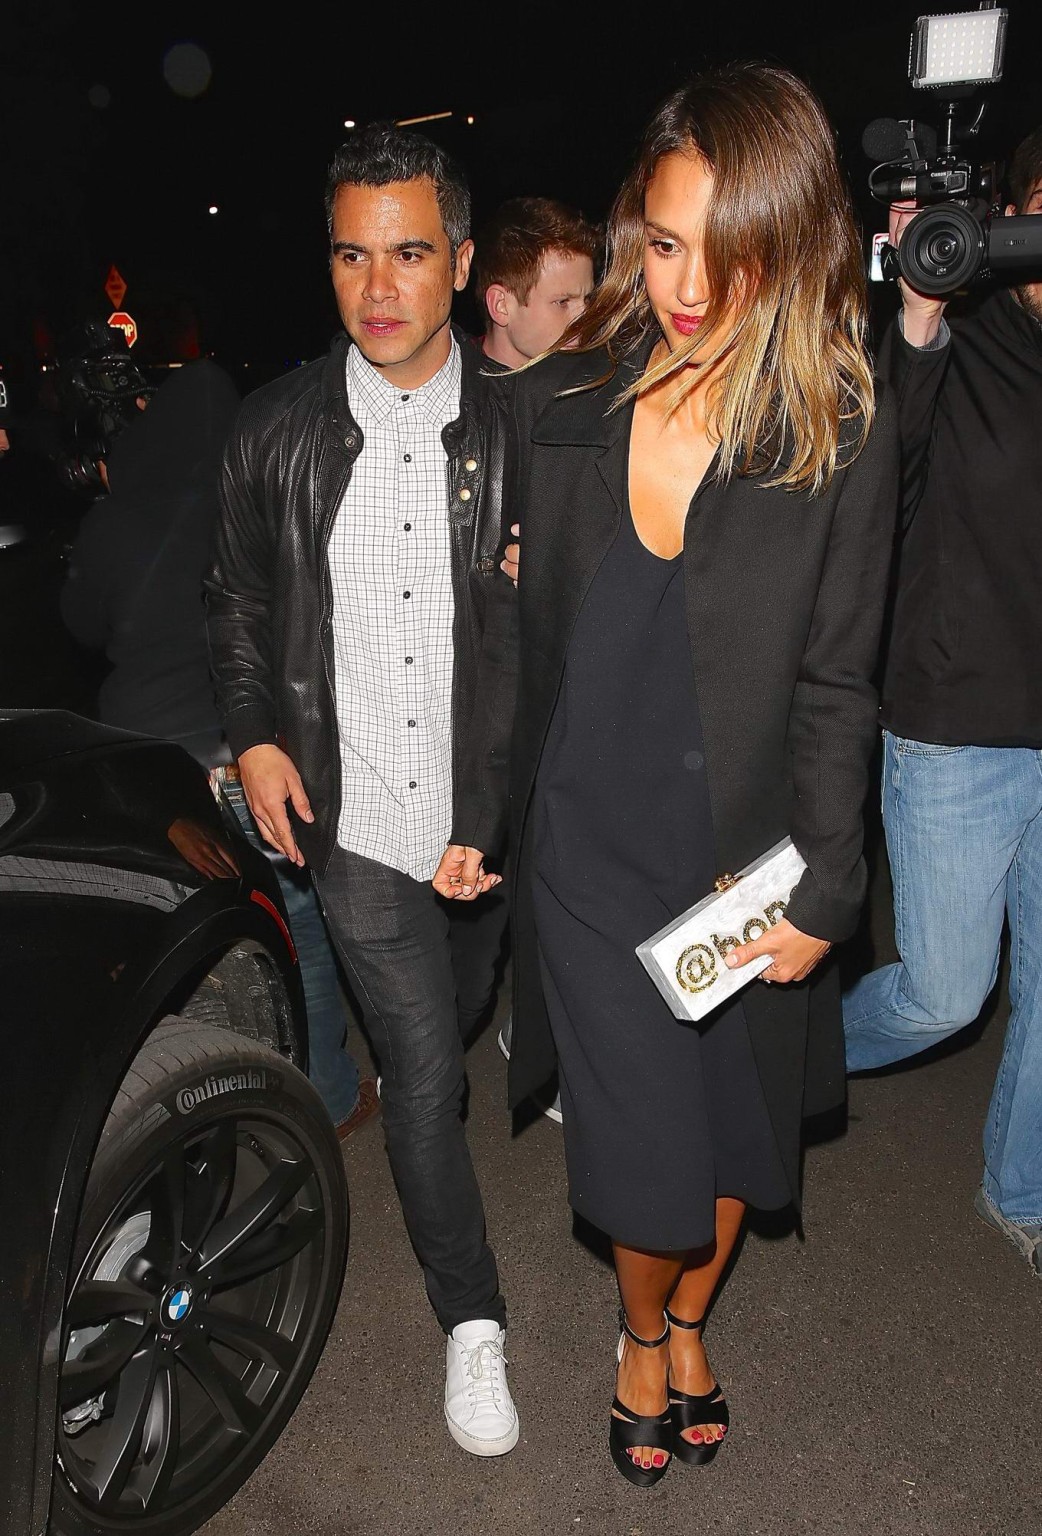 Jessica Alba shows cleavage leaving a club in Los Angeles #75170603